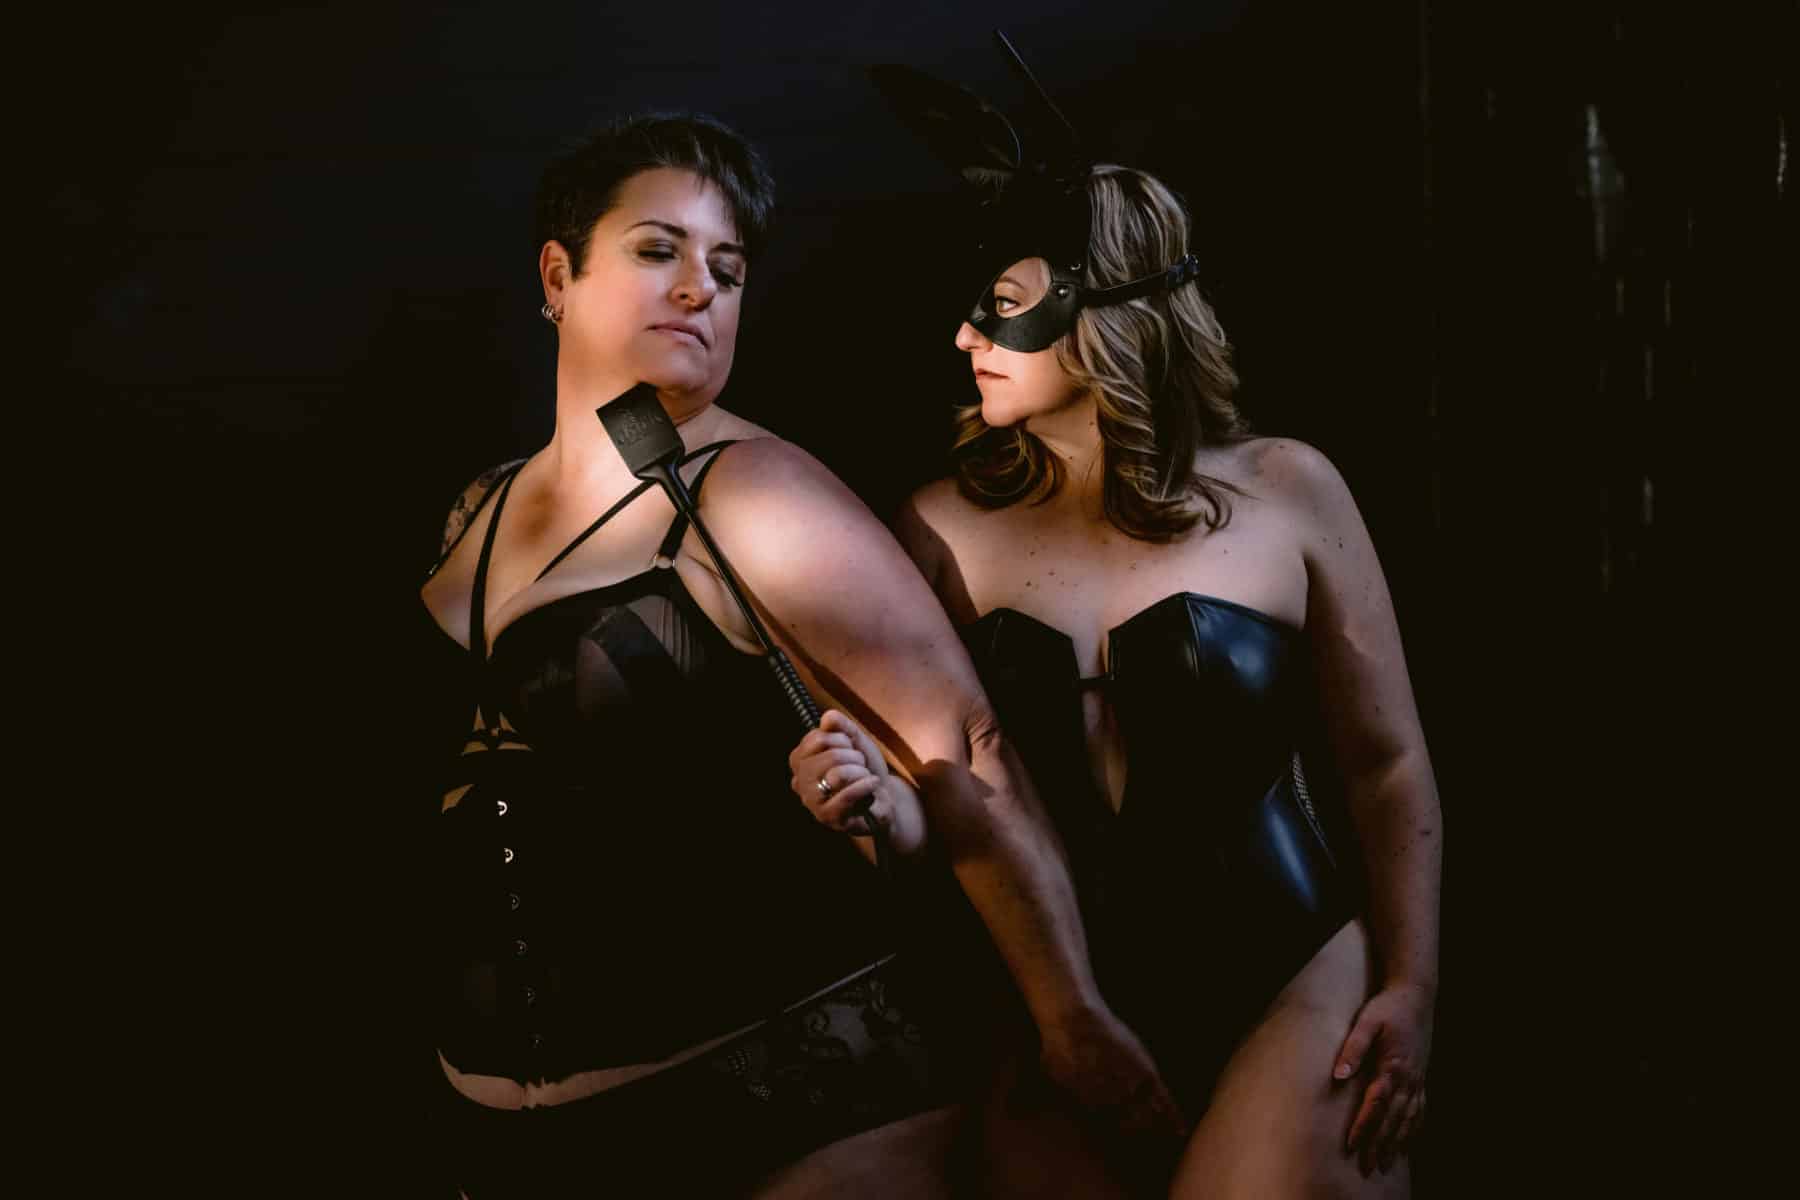 When should I book my couples boudoir session?